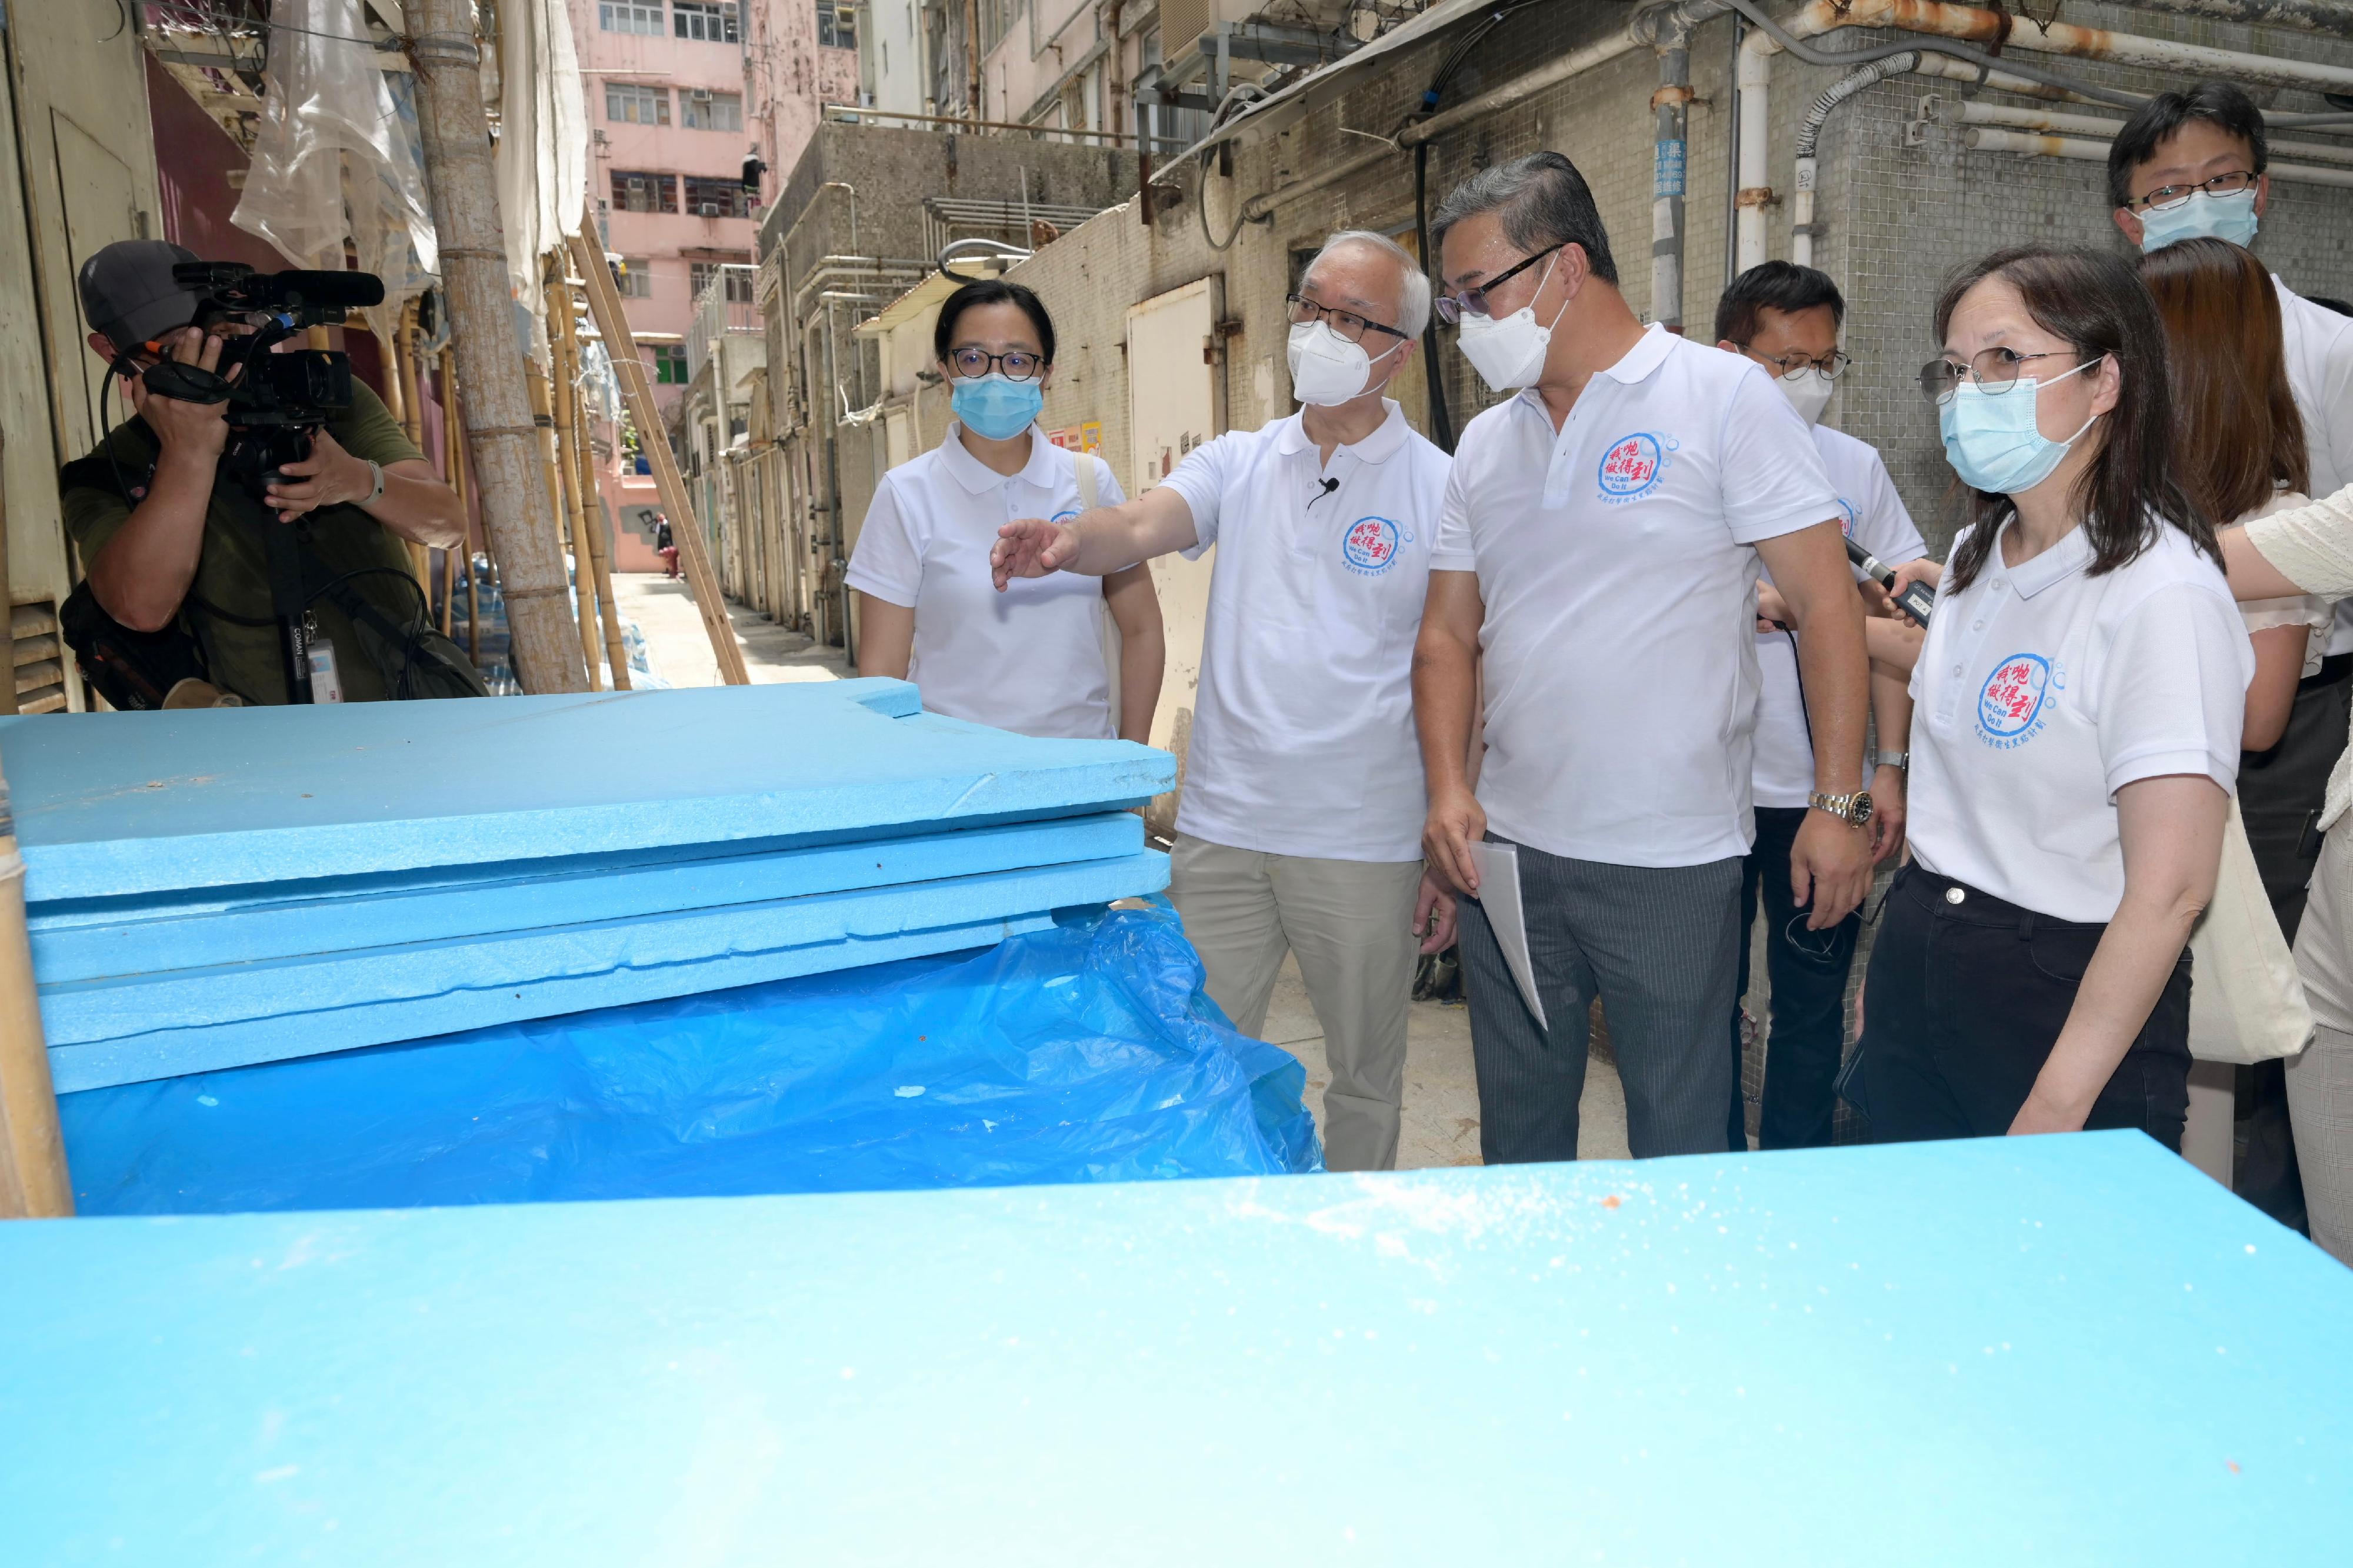 The Secretary for Environment and Ecology, Mr Tse Chin-wan (third left), accompanied by the Director of Food and Environmental Hygiene, Ms Irene Young (second left), inspected the clearance operation carried out by the Food and Environmental Hygiene Department (FEHD) against refuse and waste piled up in the rear lane of Shui Che Kwun Street in Yuen Long District today (August 14). Picture shows Mr Tse examining the FEHD's work for clearance of miscellaneous articles and rodent control in rear lane.